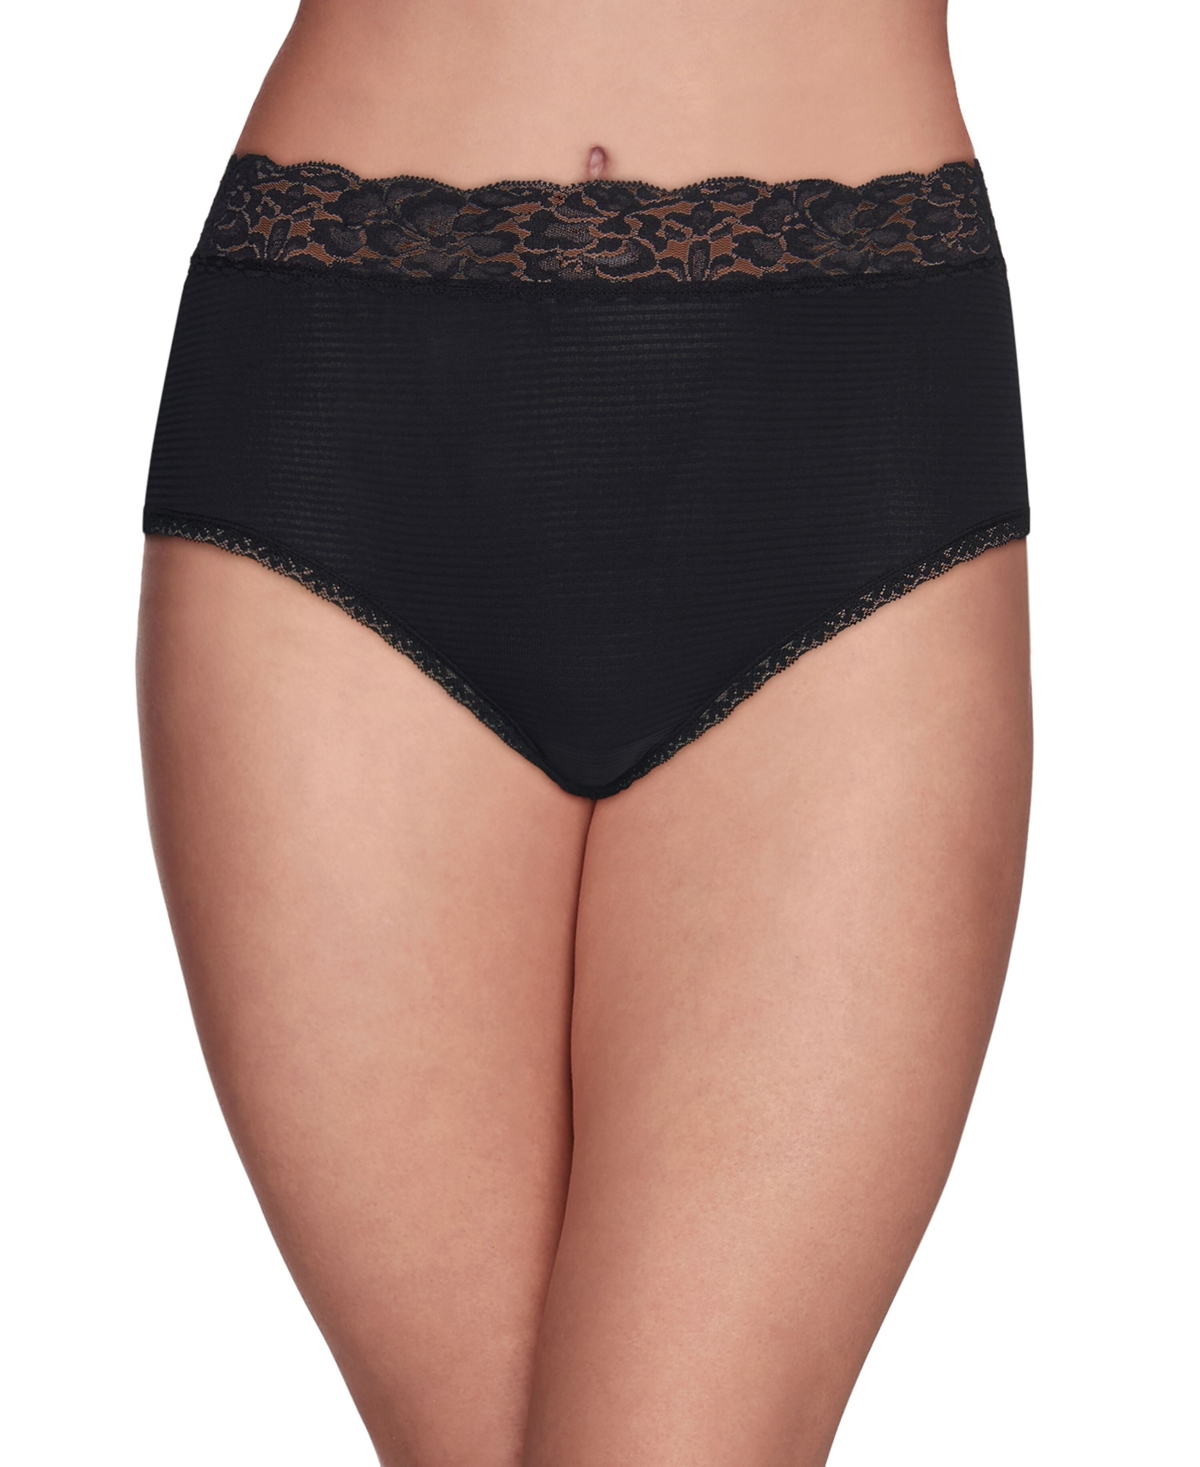 Flattering Lace Stretch Brief Underwear 13281, also available in extended sizes - Midnight Black